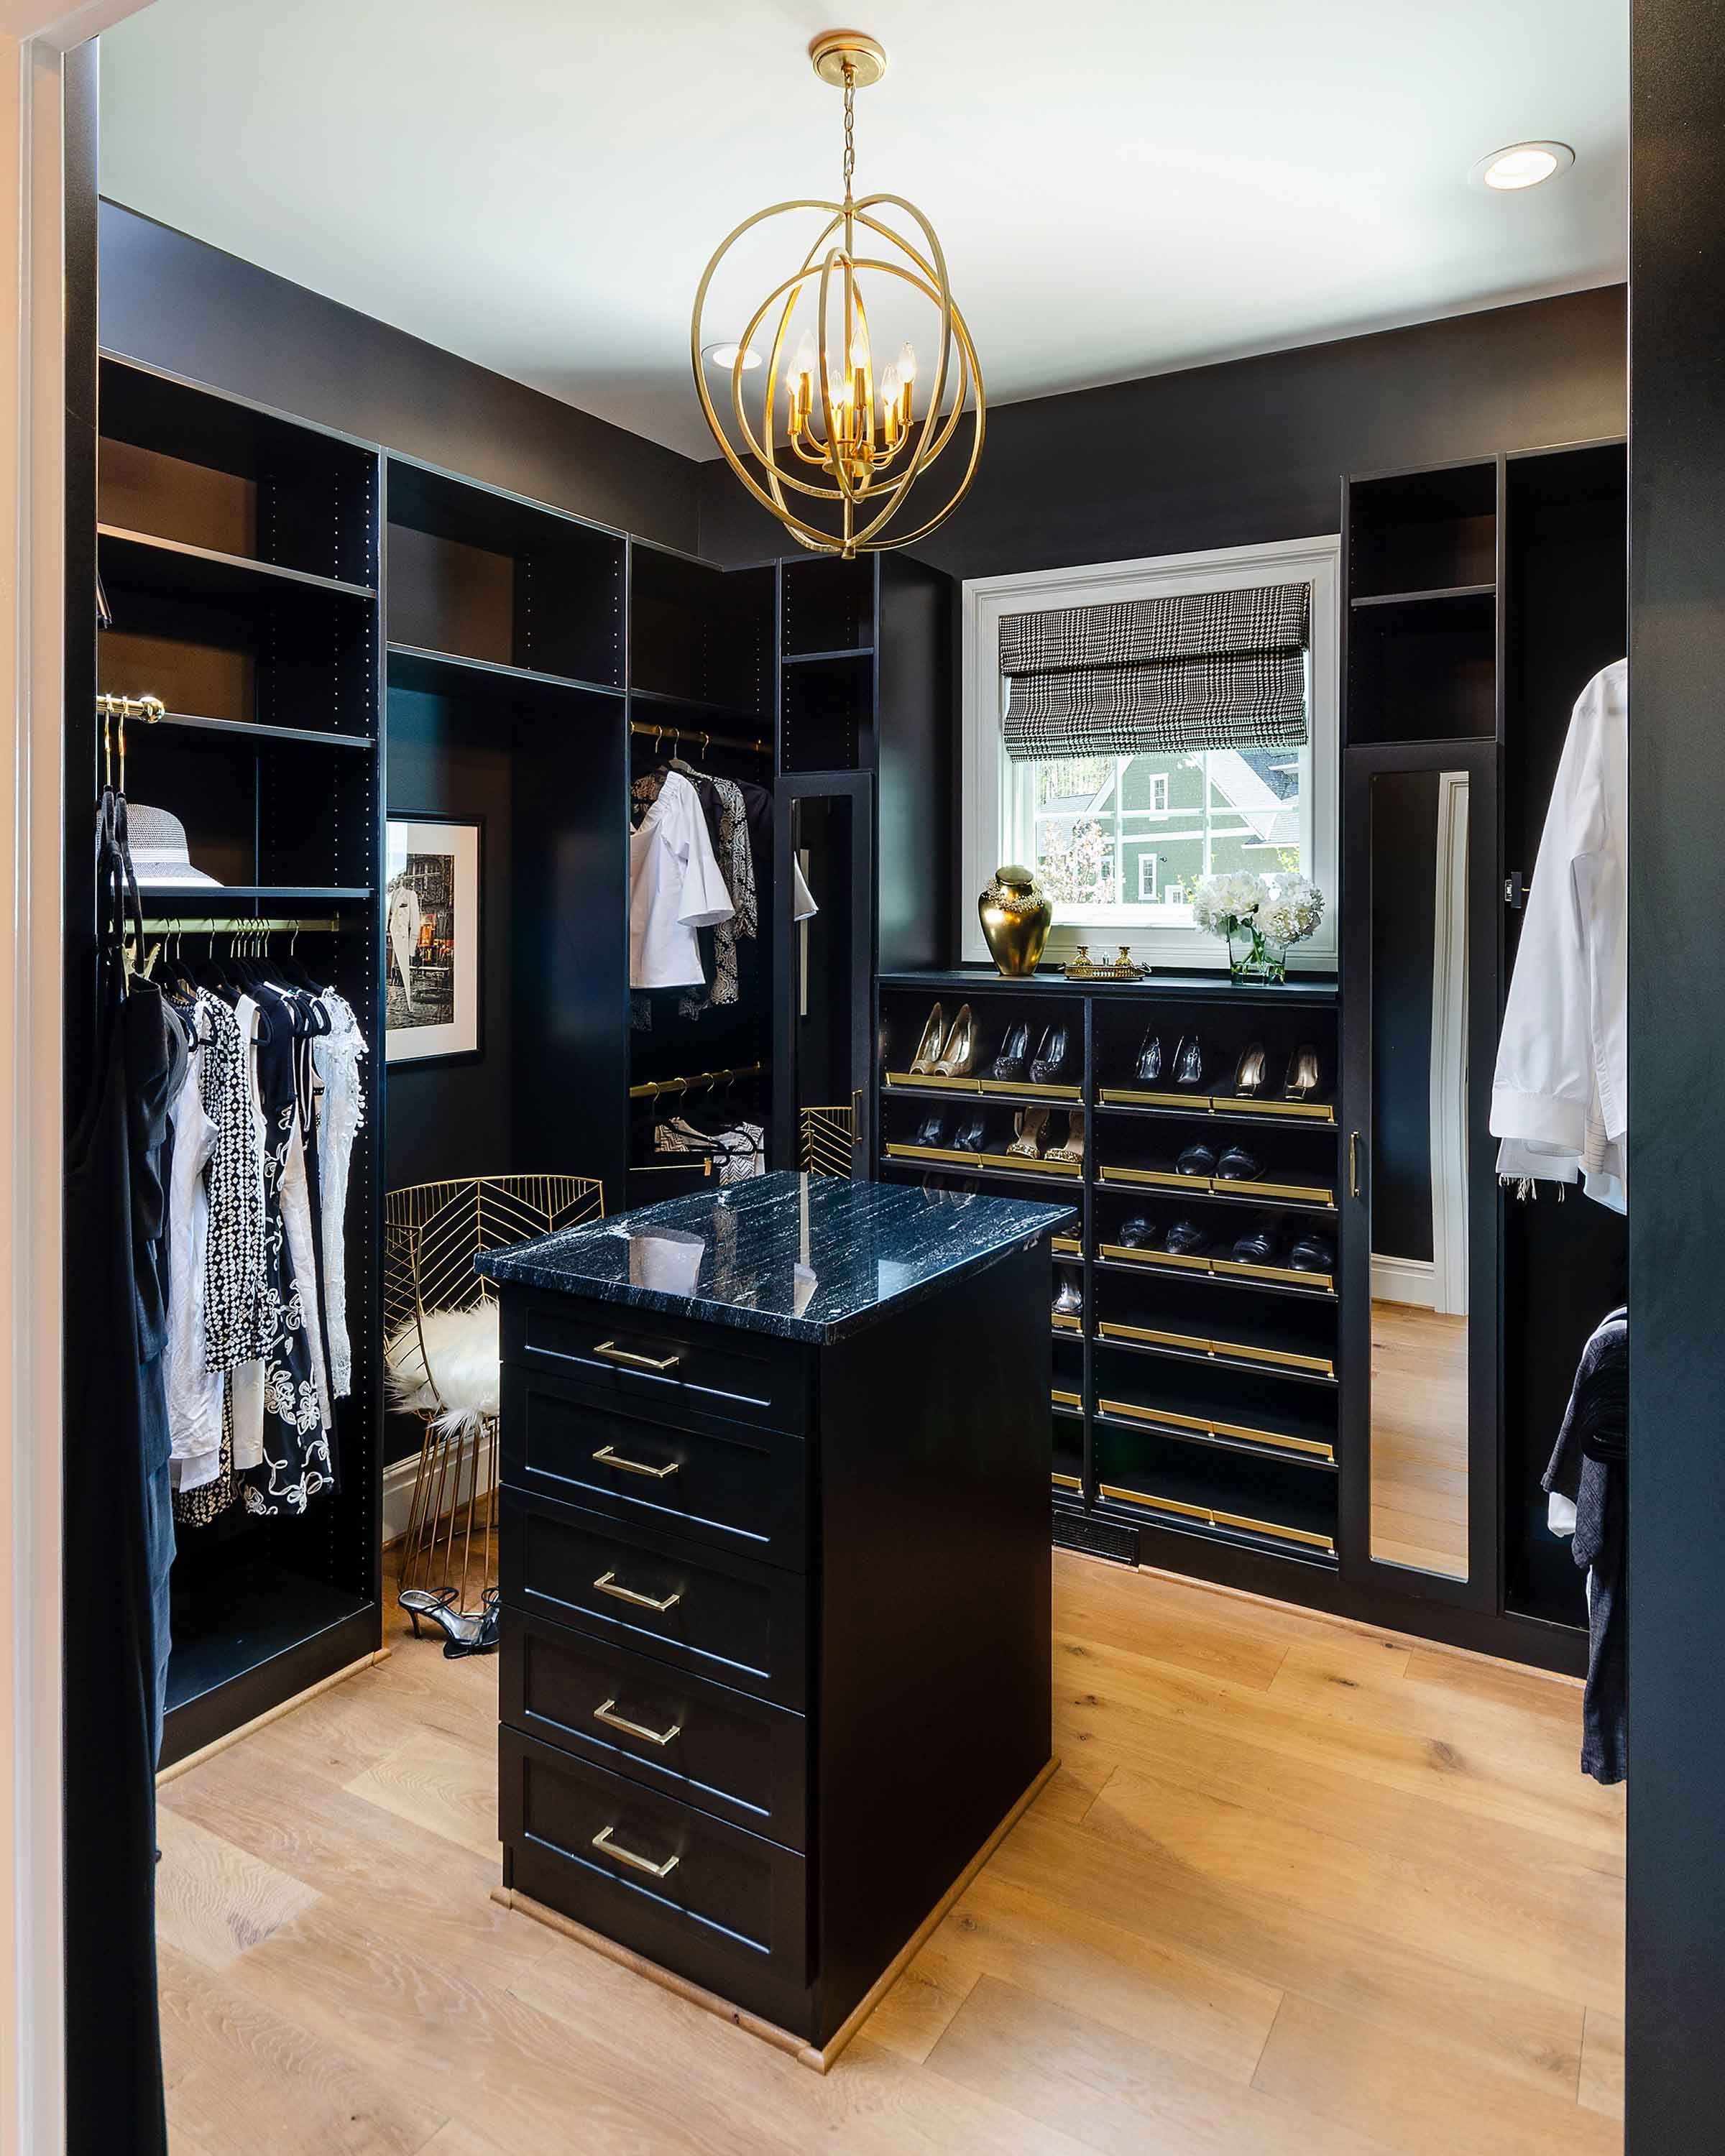 Closet Factory’s Pantry and Closet Designs Featured In Three Showcase